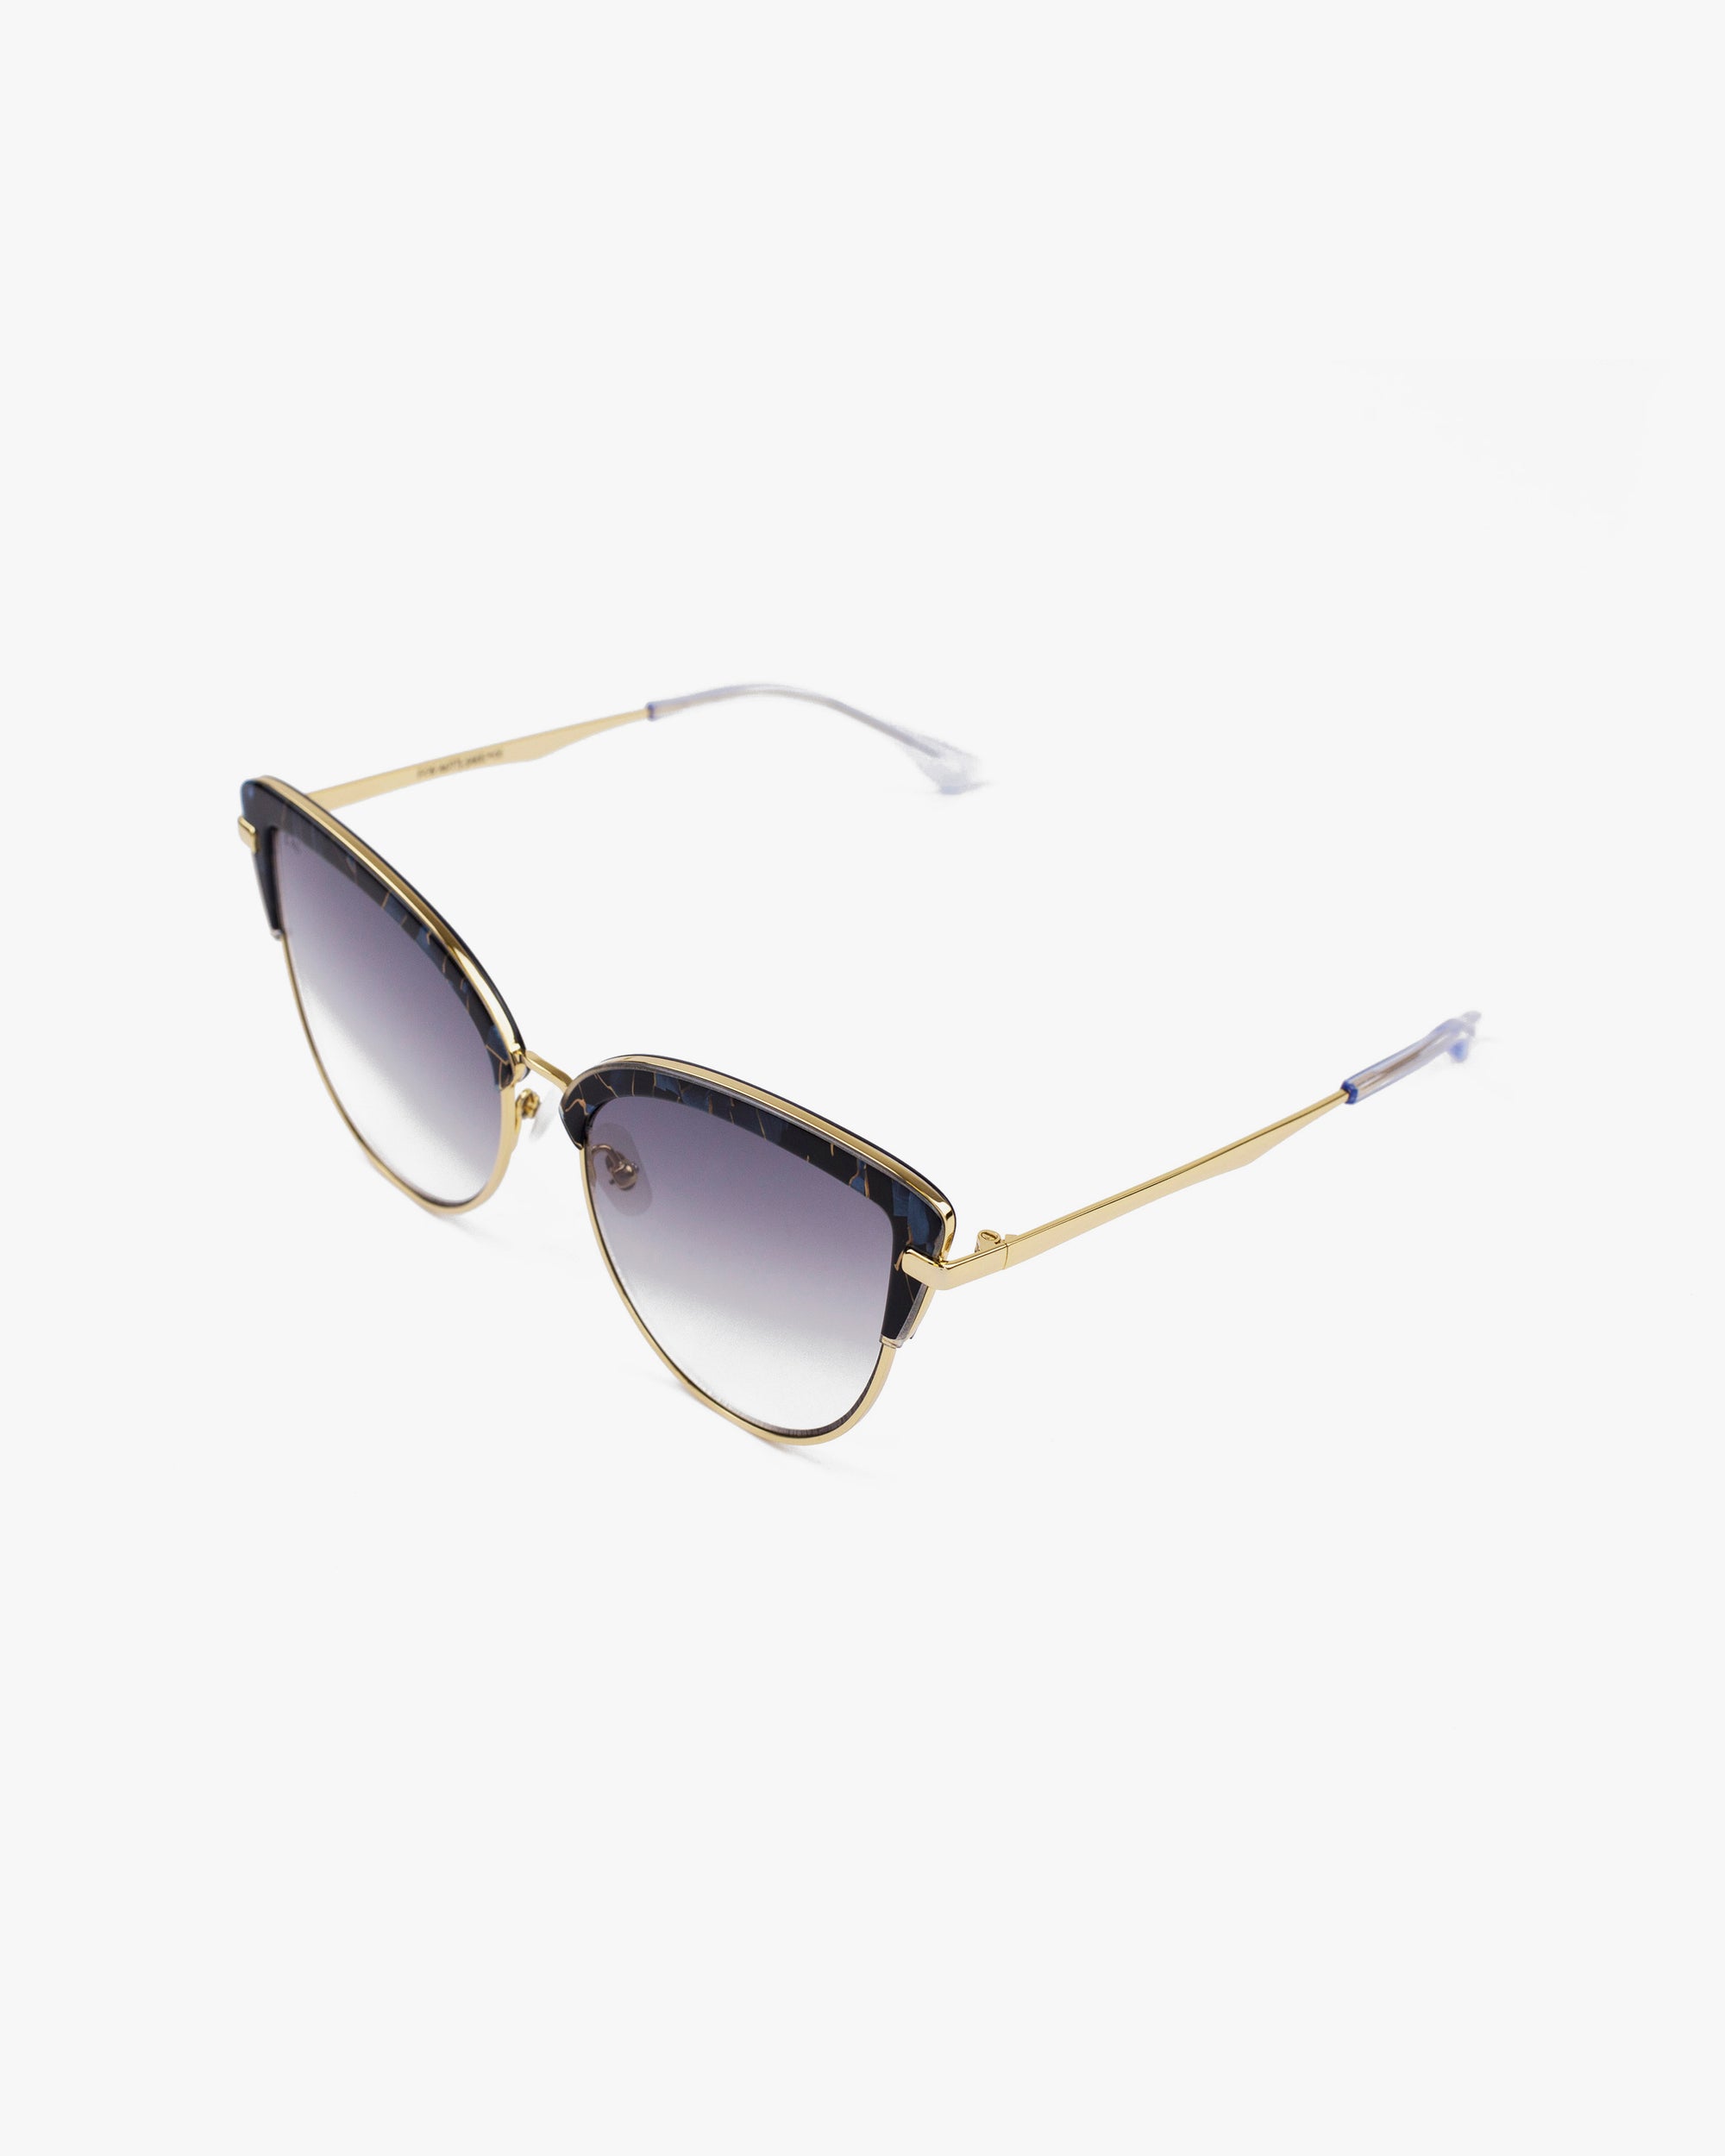 A pair of stylish For Art&#39;s Sake® Venus sunglasses with gradient dark nylon lenses and an 18-karat gold-plated frame. The top part of the frame is black, adding a touch of contrast. The arms are thin and also gold-colored, with black ear tips for comfort.